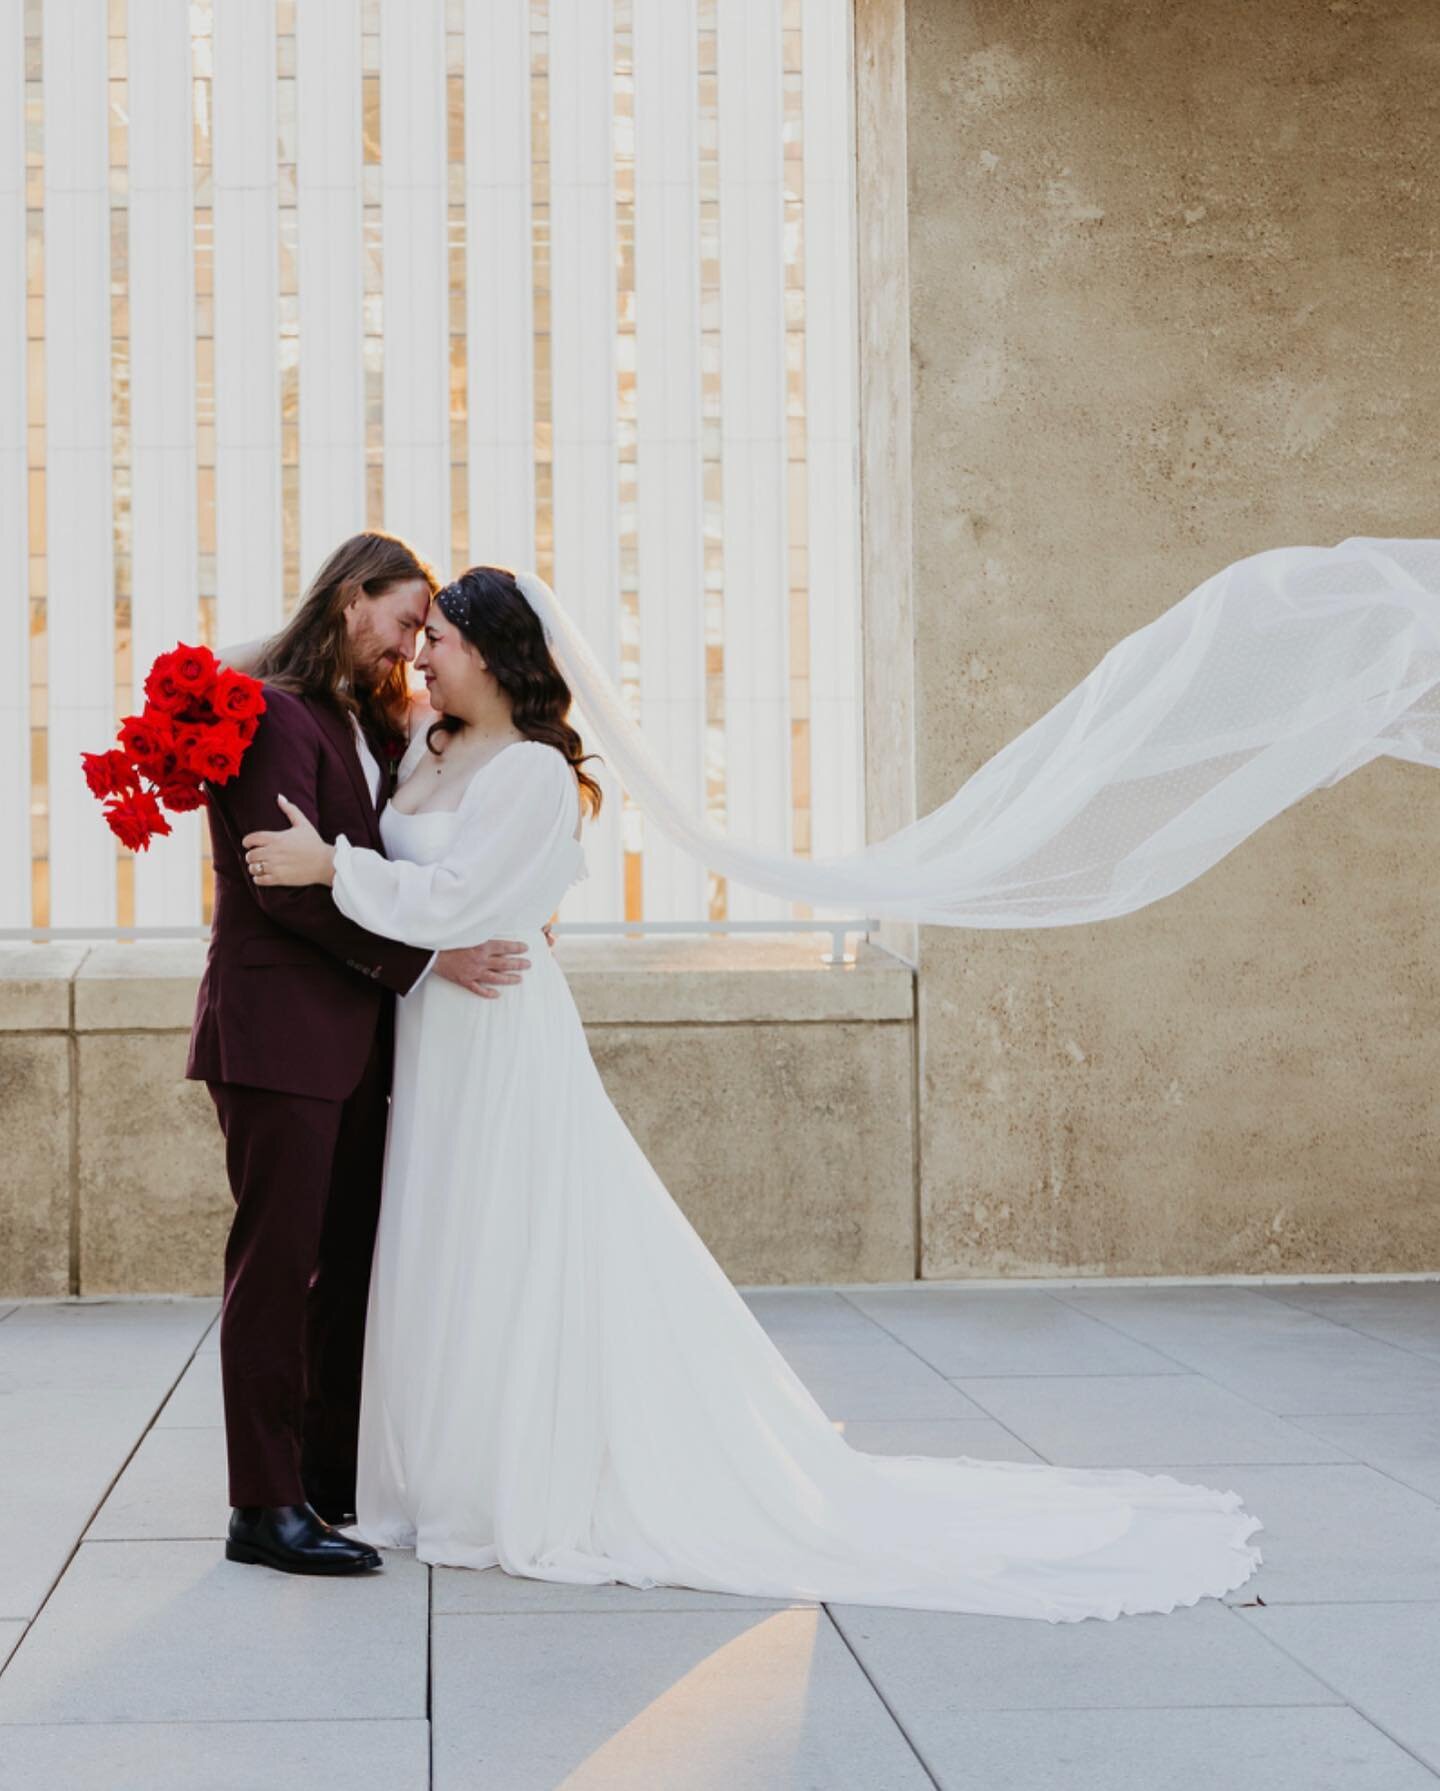 A Bold + Modern City Elopement 

I fell head over hills for this monochromatic, modern vibe. Shoutout to the incredibly talented dream team that made it happen 🖤

Venue: @mintmuseumevents
Photography: @thinspaceproductions
Videography: @thinspacepro